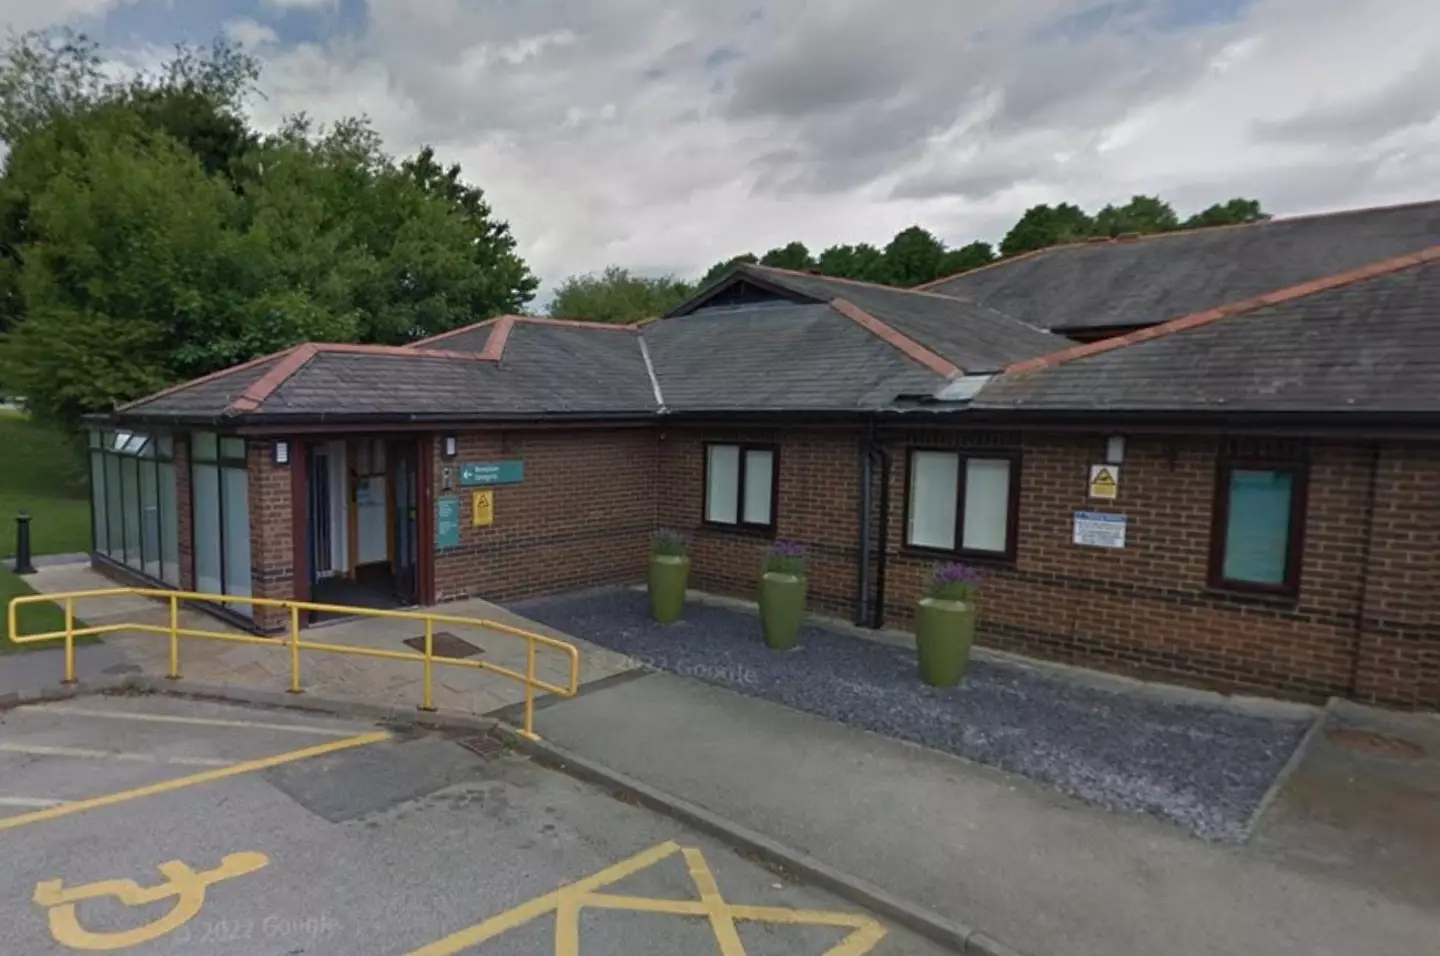 The man sadly died in the car park of a Spire Hospital in Wrexham.